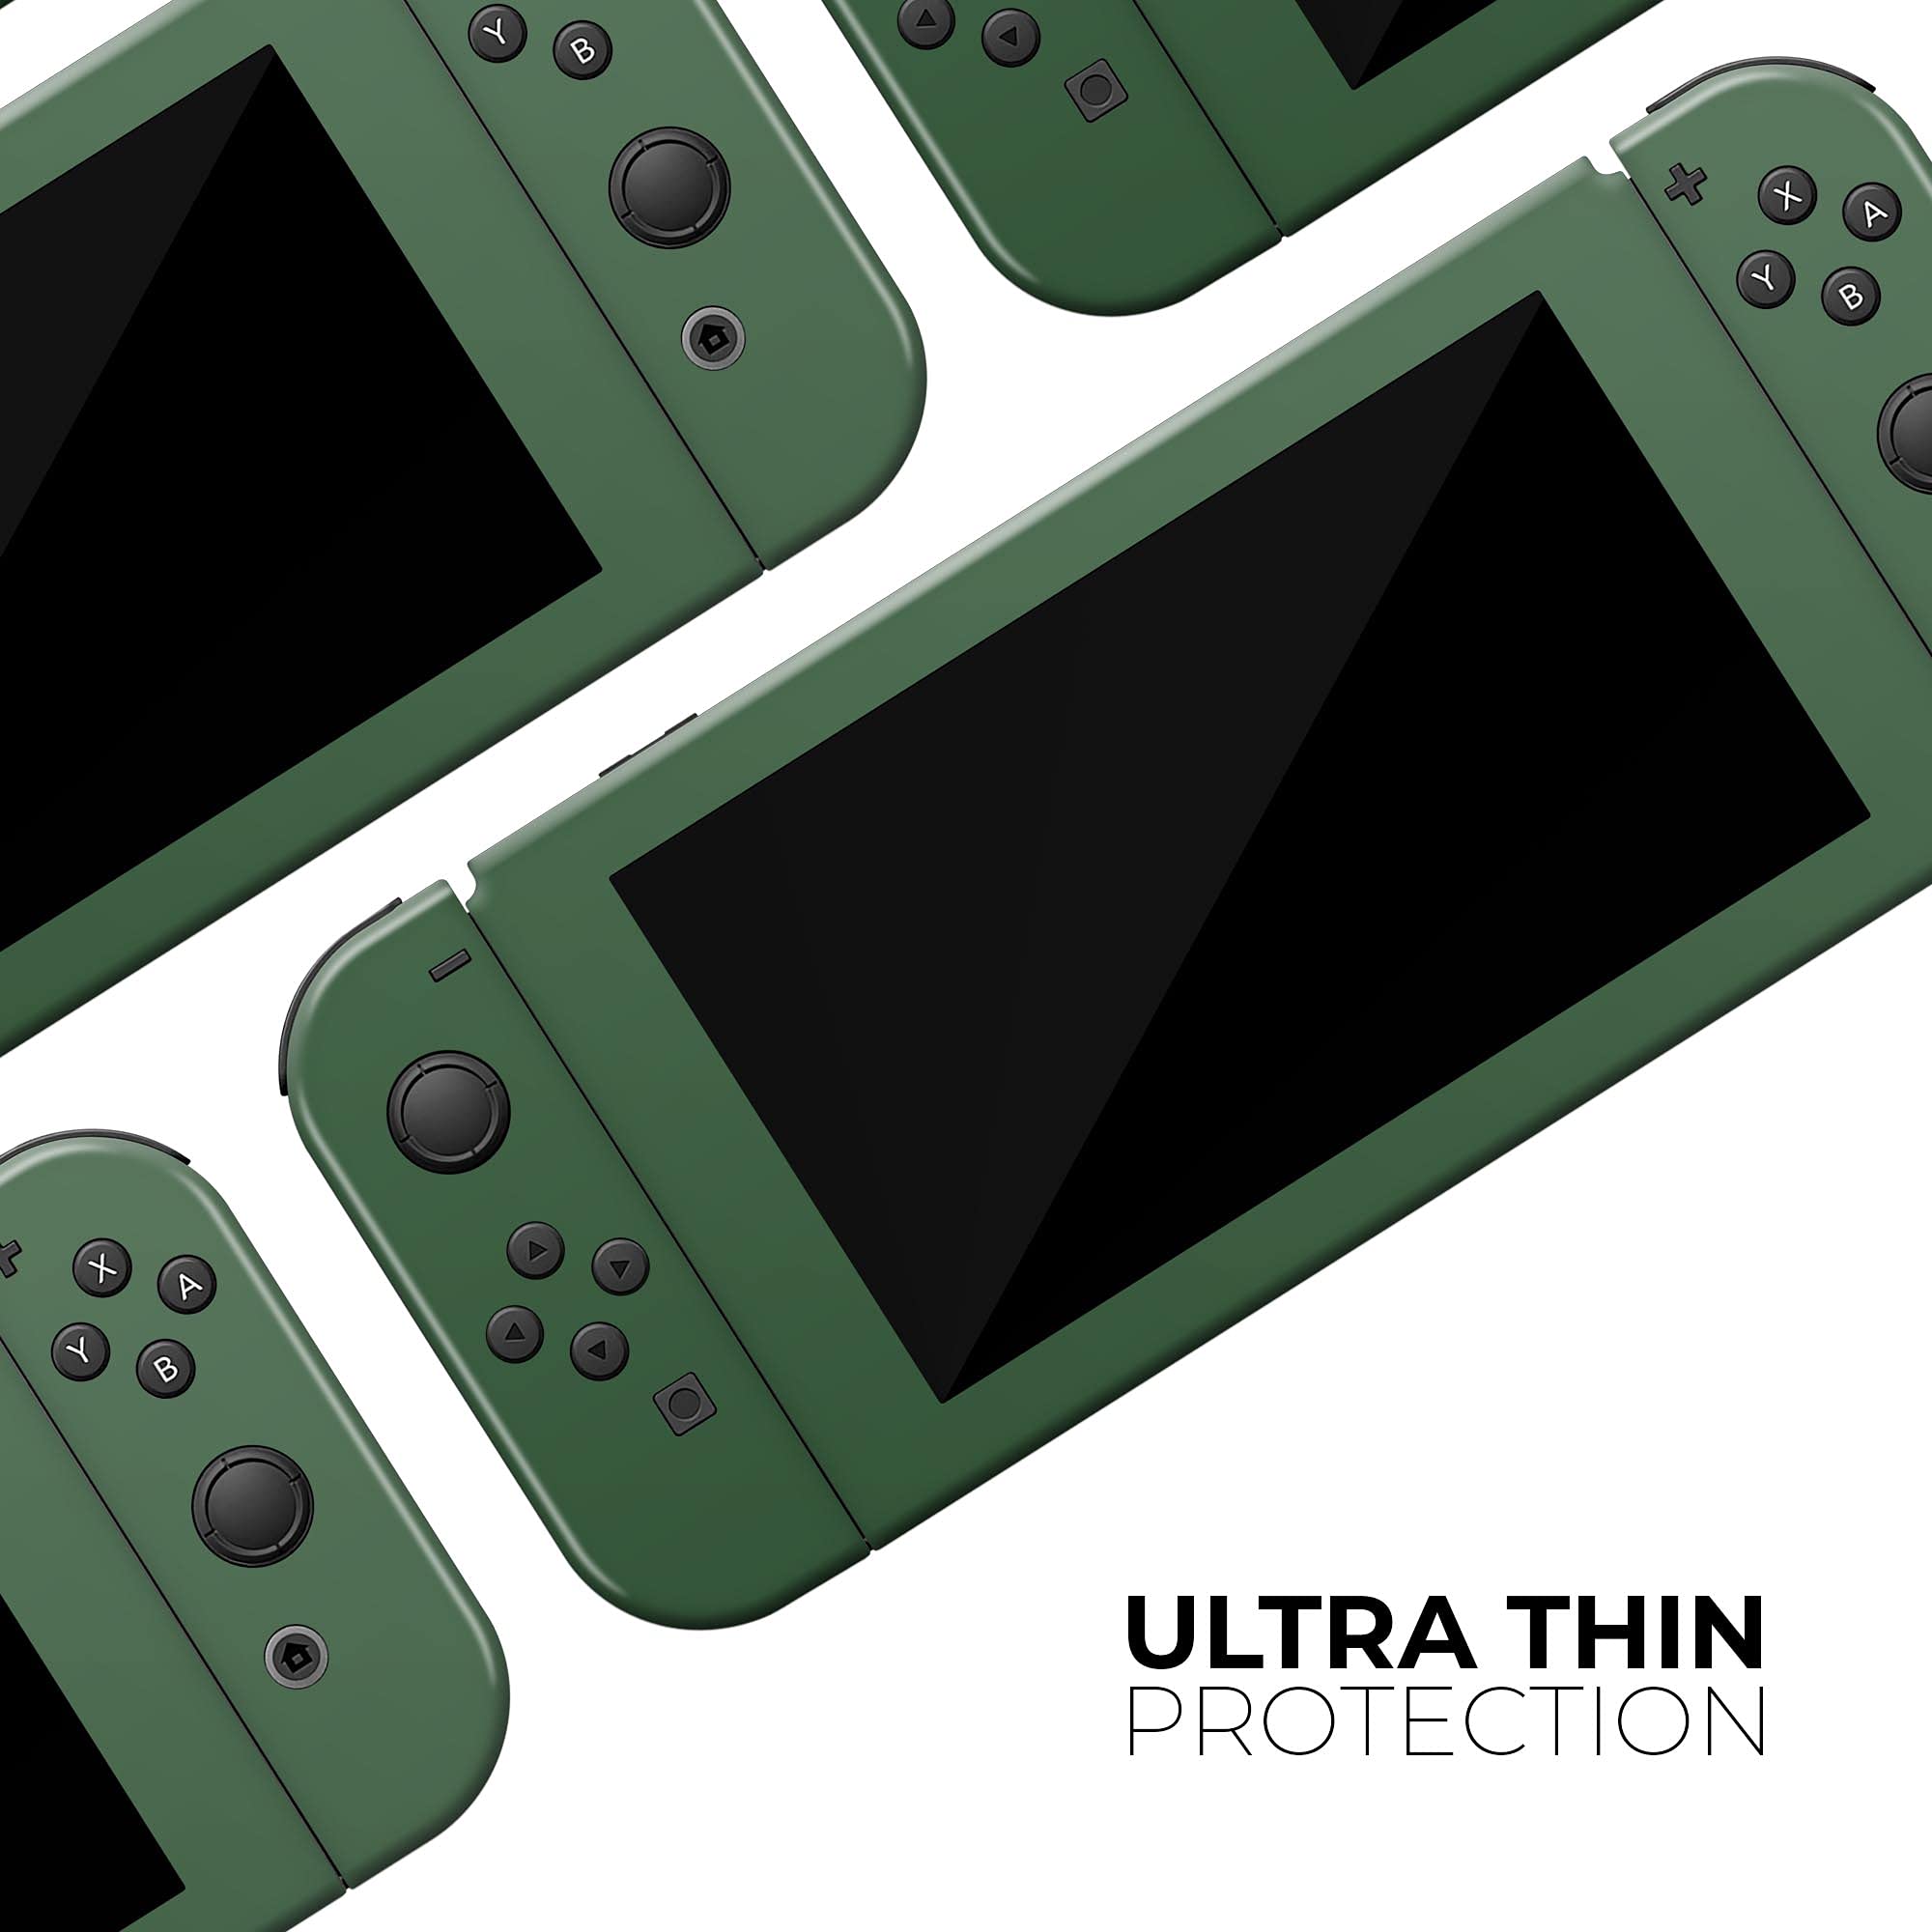 Design Skinz - Compatible with Nintendo Switch OLED Console + Joy-Con - Skin Decal Protective Scratch-Resistant Removable Vinyl Wrap Cover - Solid Hunter Green